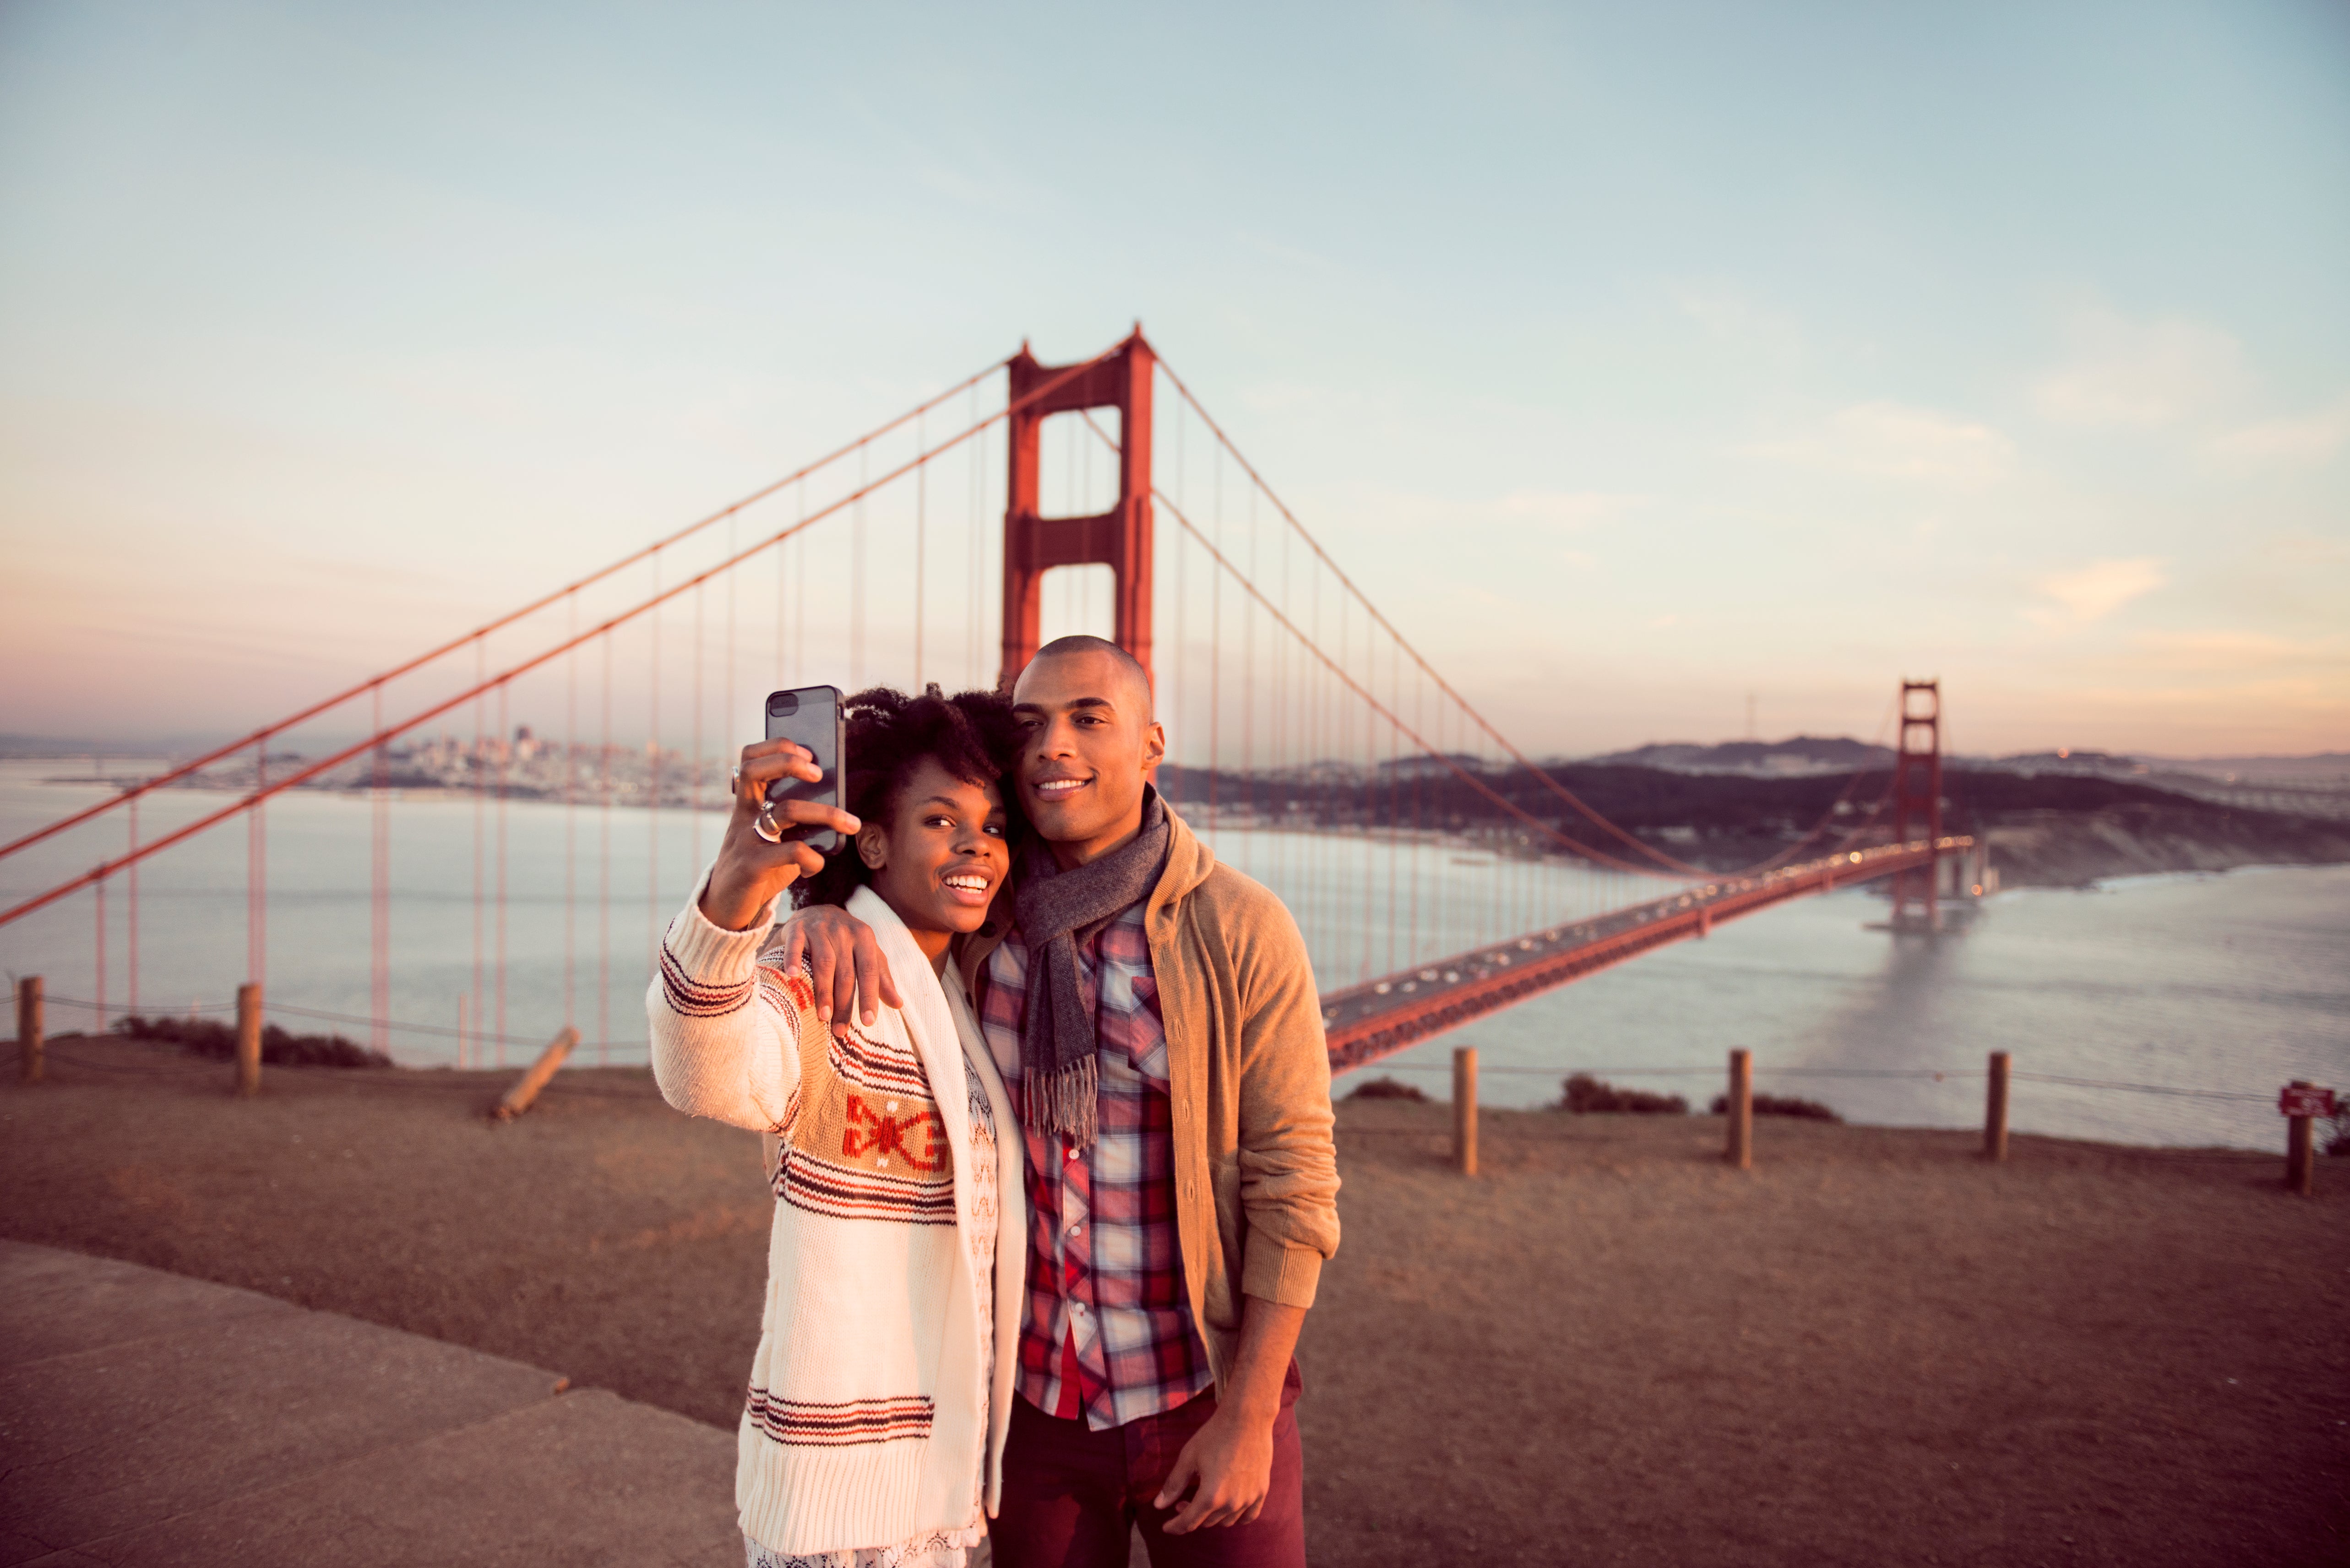 What Your Social Media Posts Can Say About Your Relationship